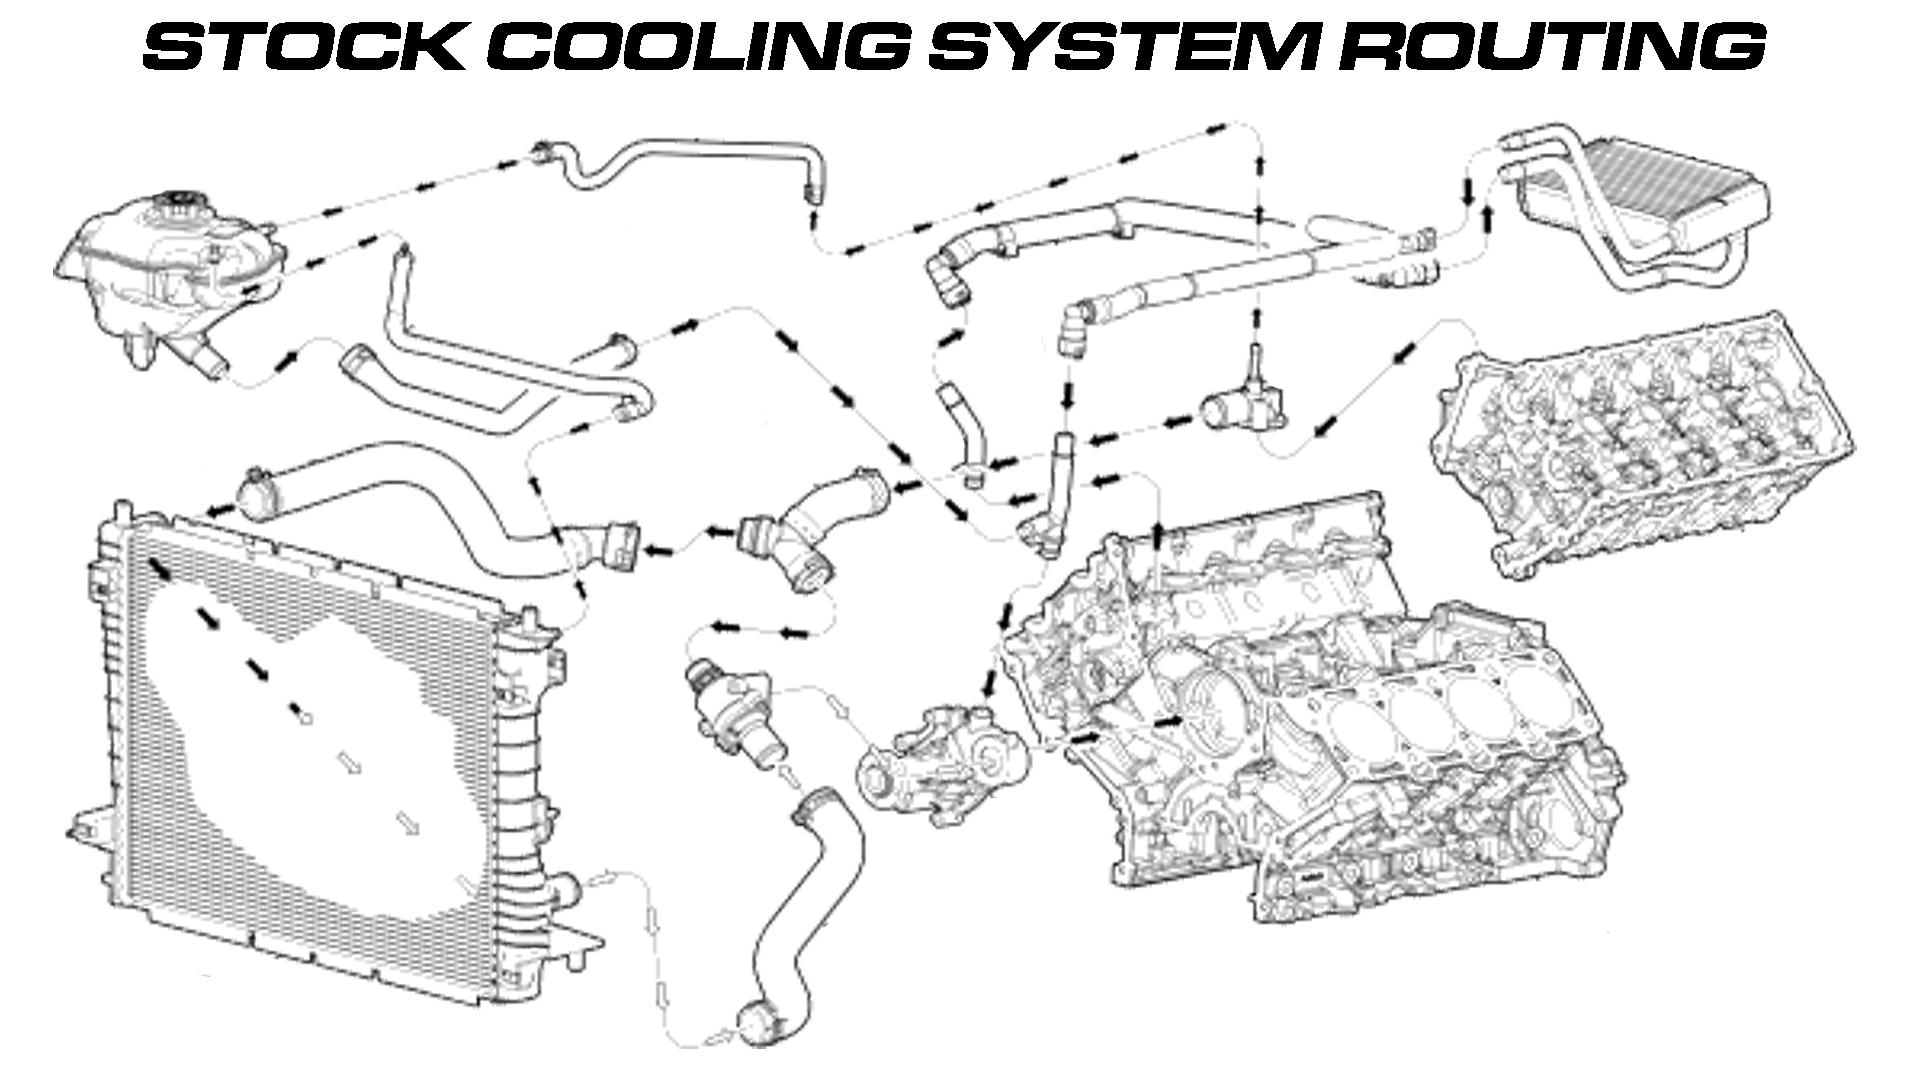 5.0 Coyote Cooling System Diagram 82